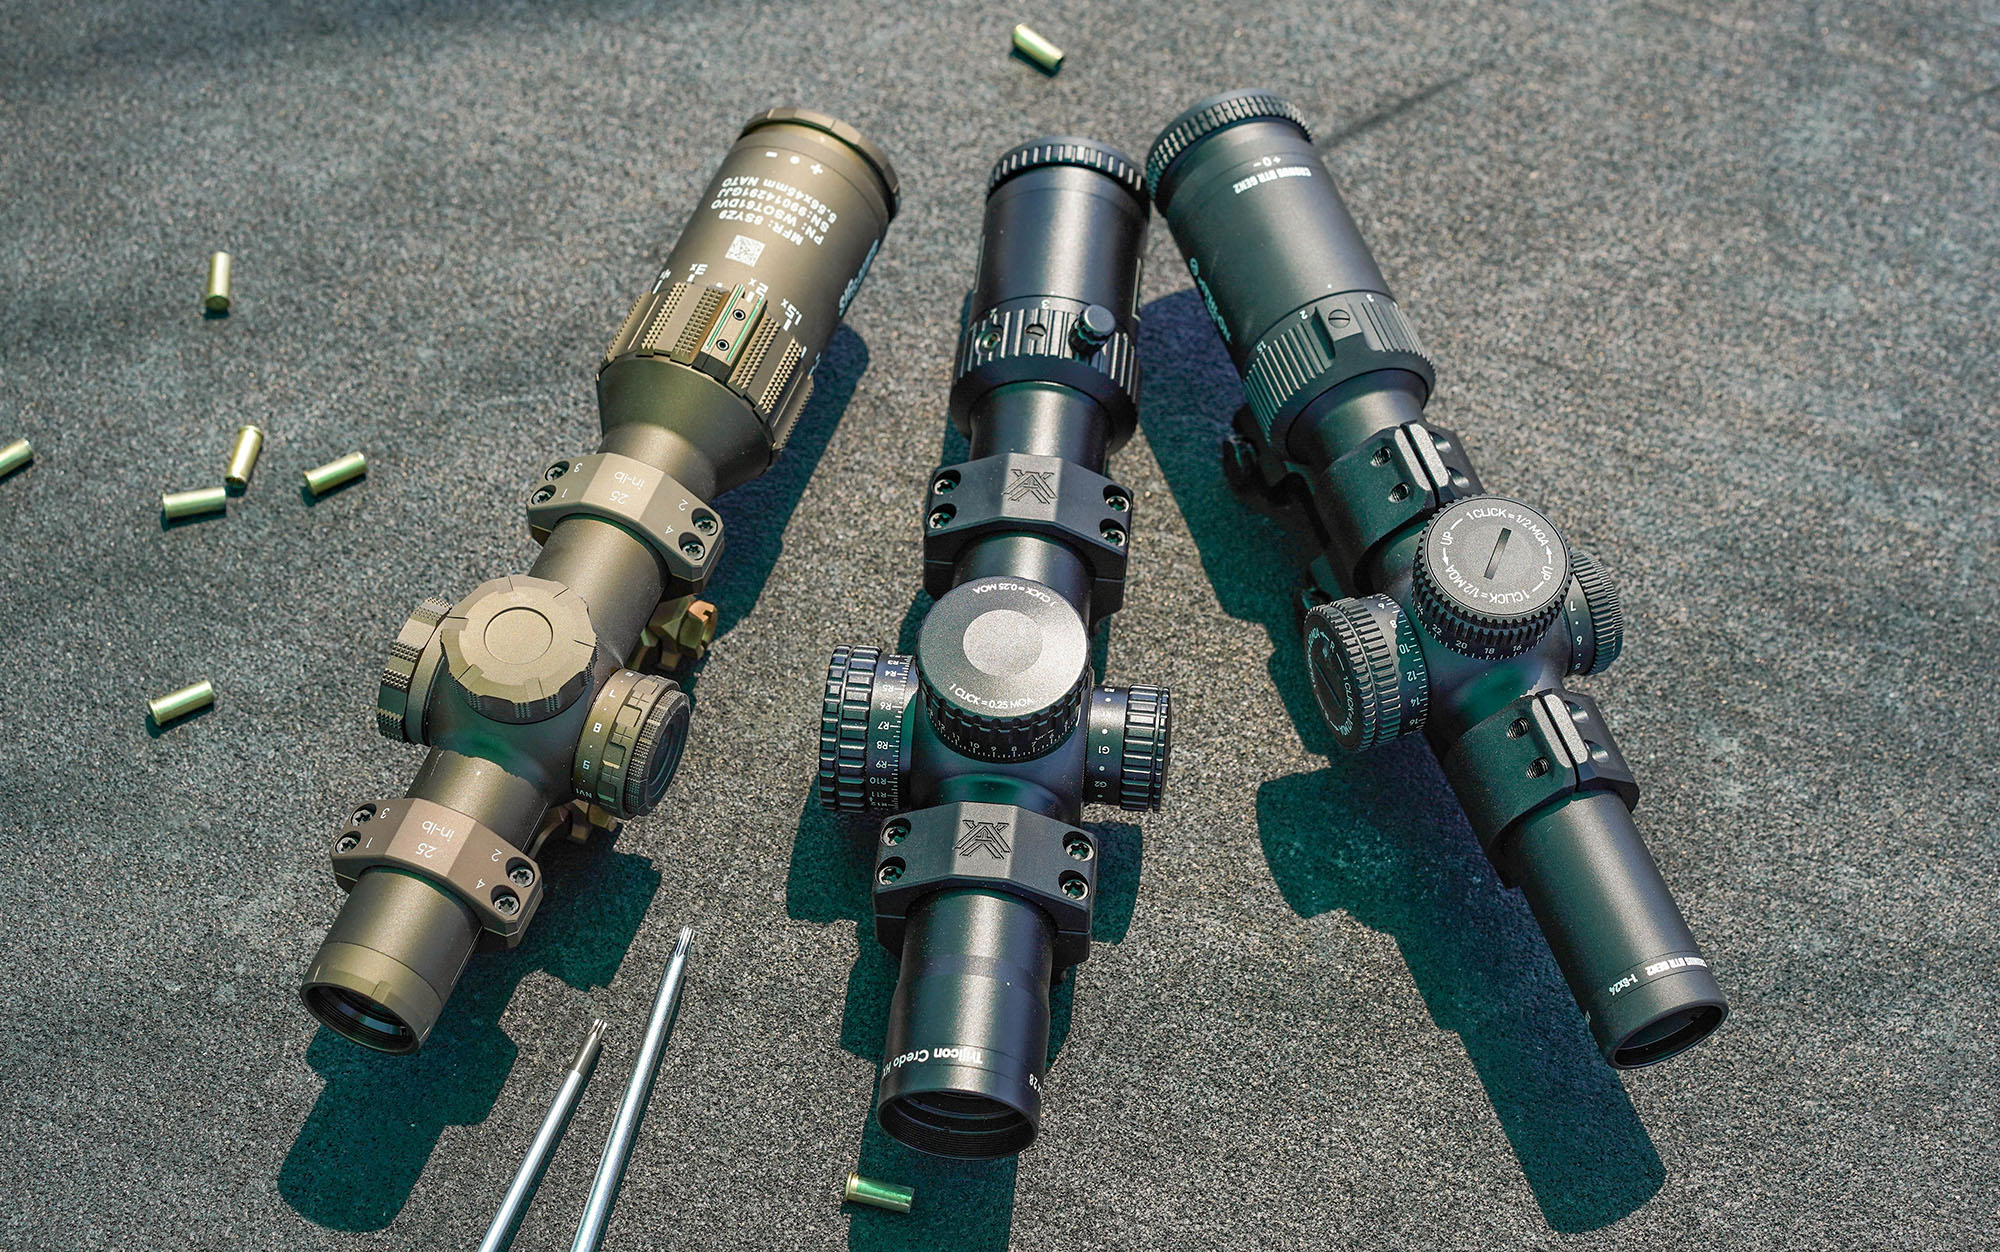 Find out how to choose the best LPVO riflescopes.